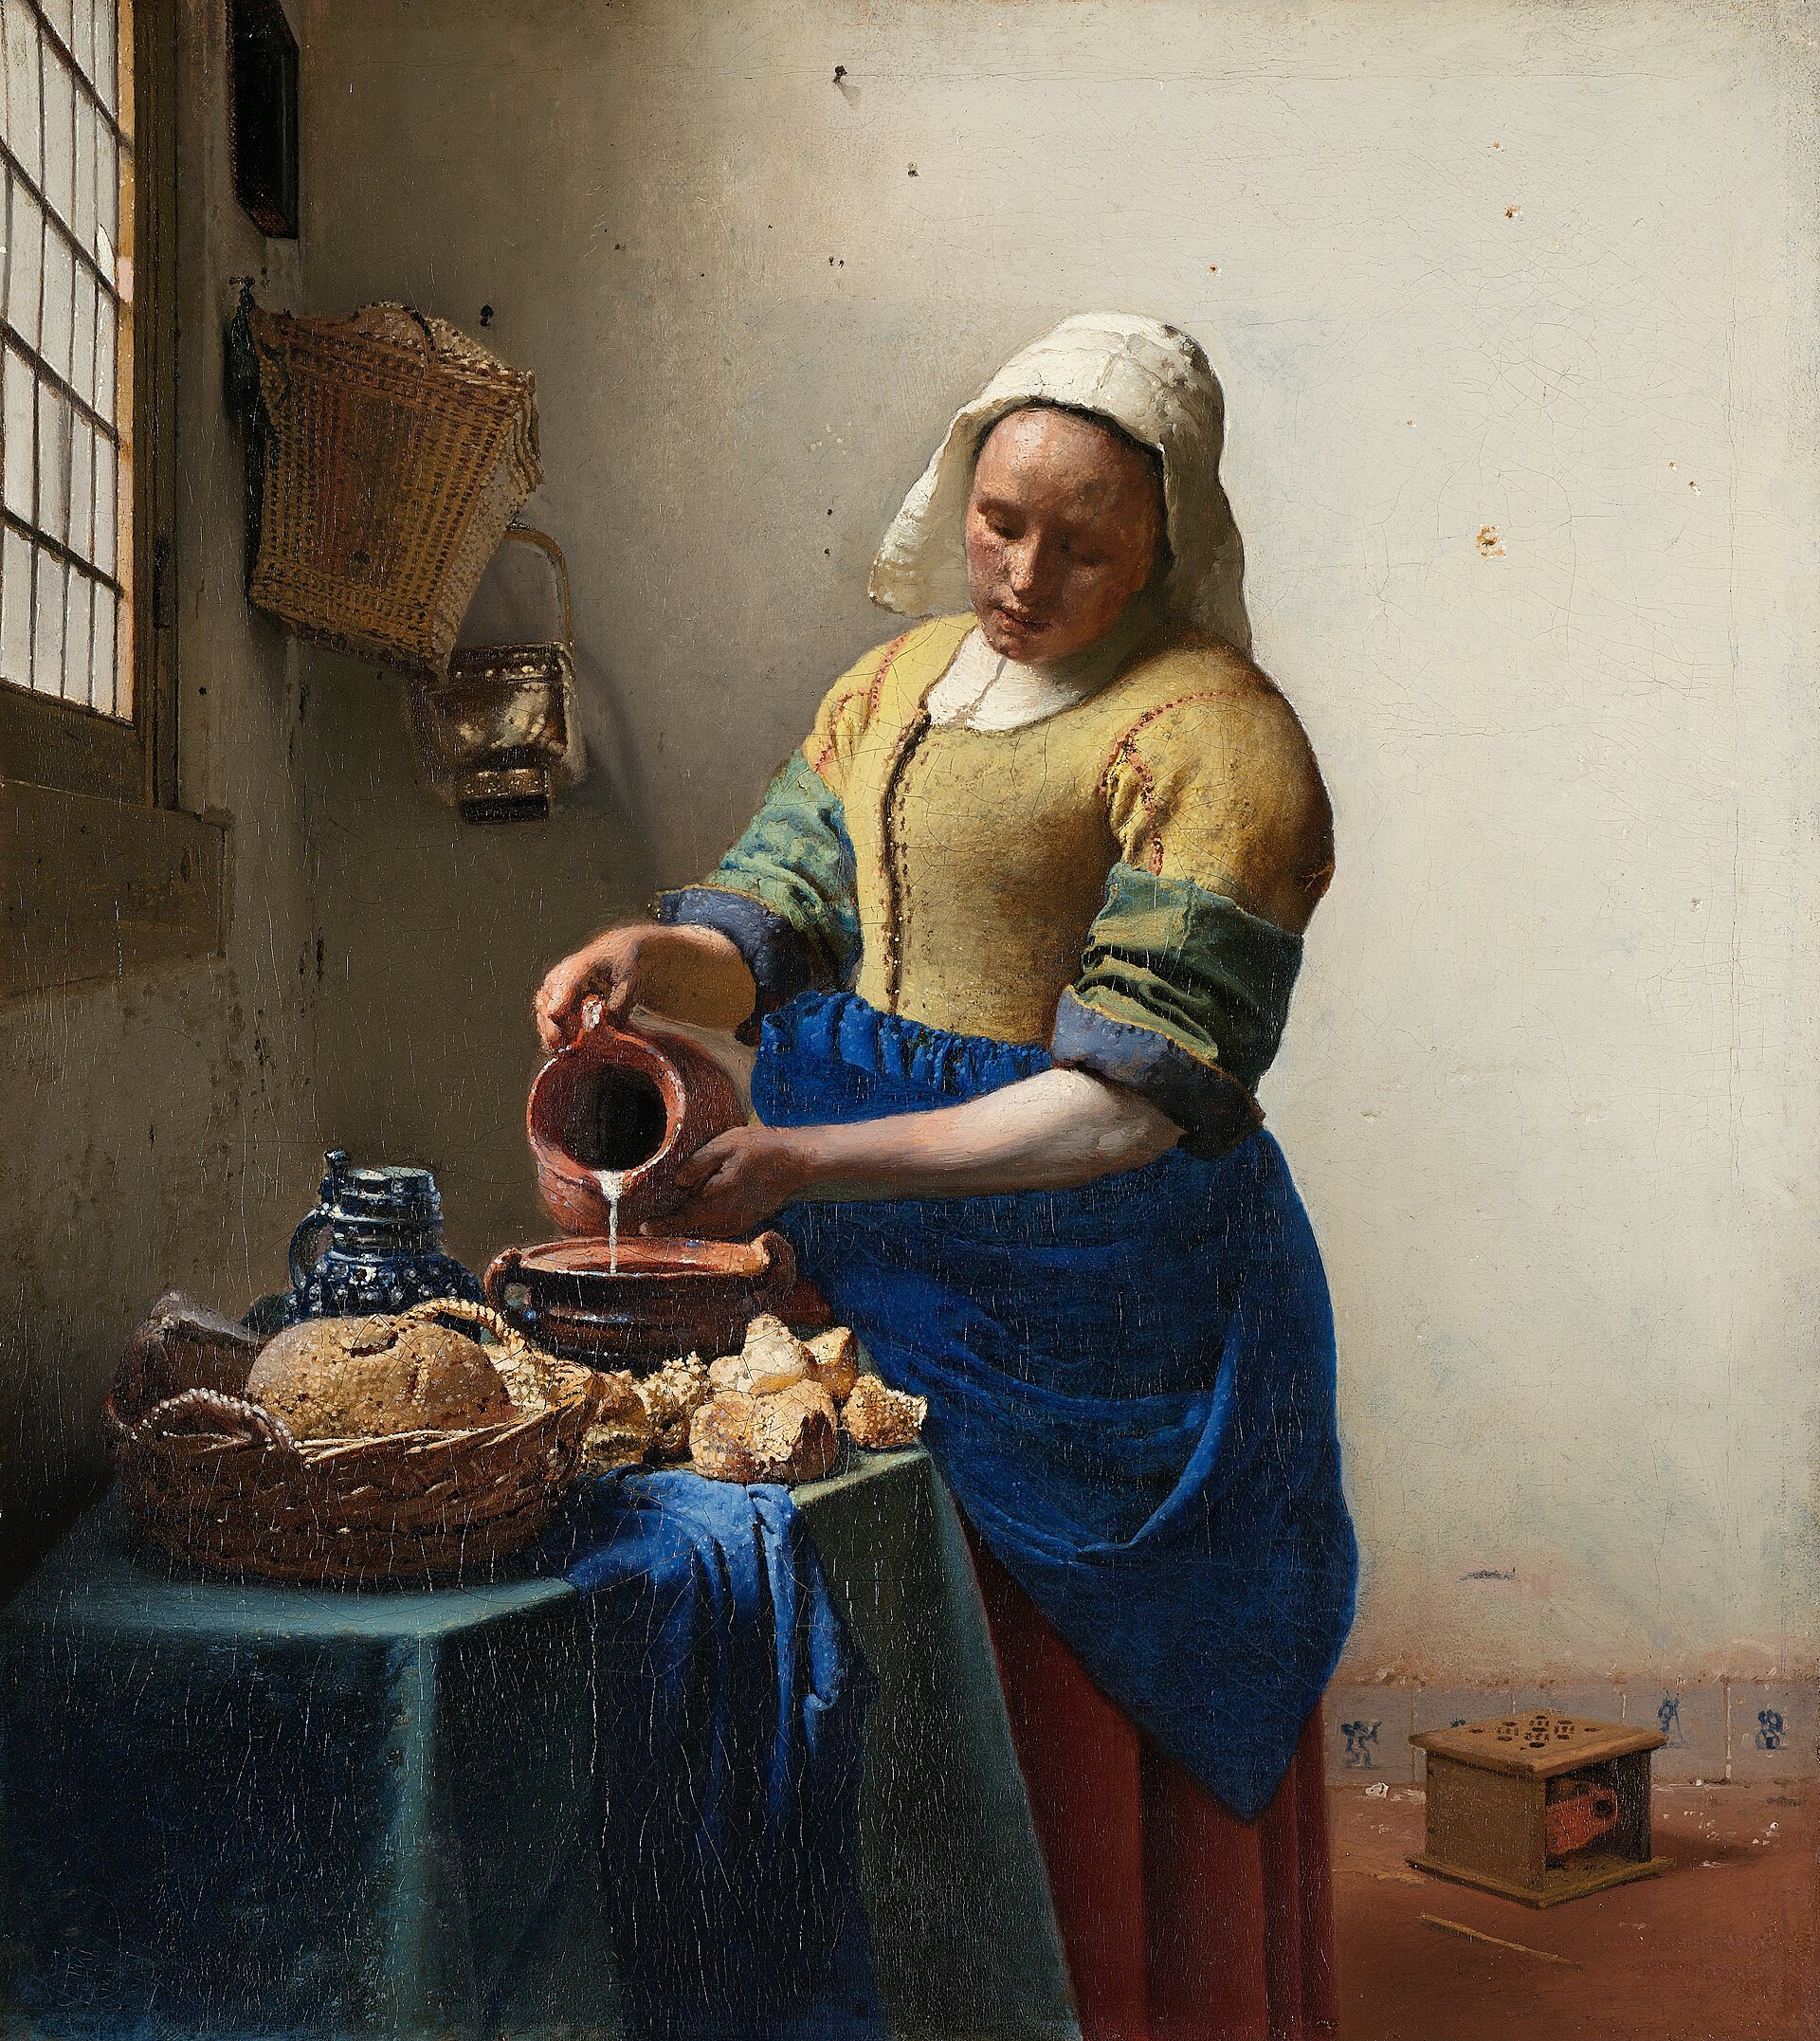 Dutch working girl (17th century) as portrayed by Johannes Vermeer